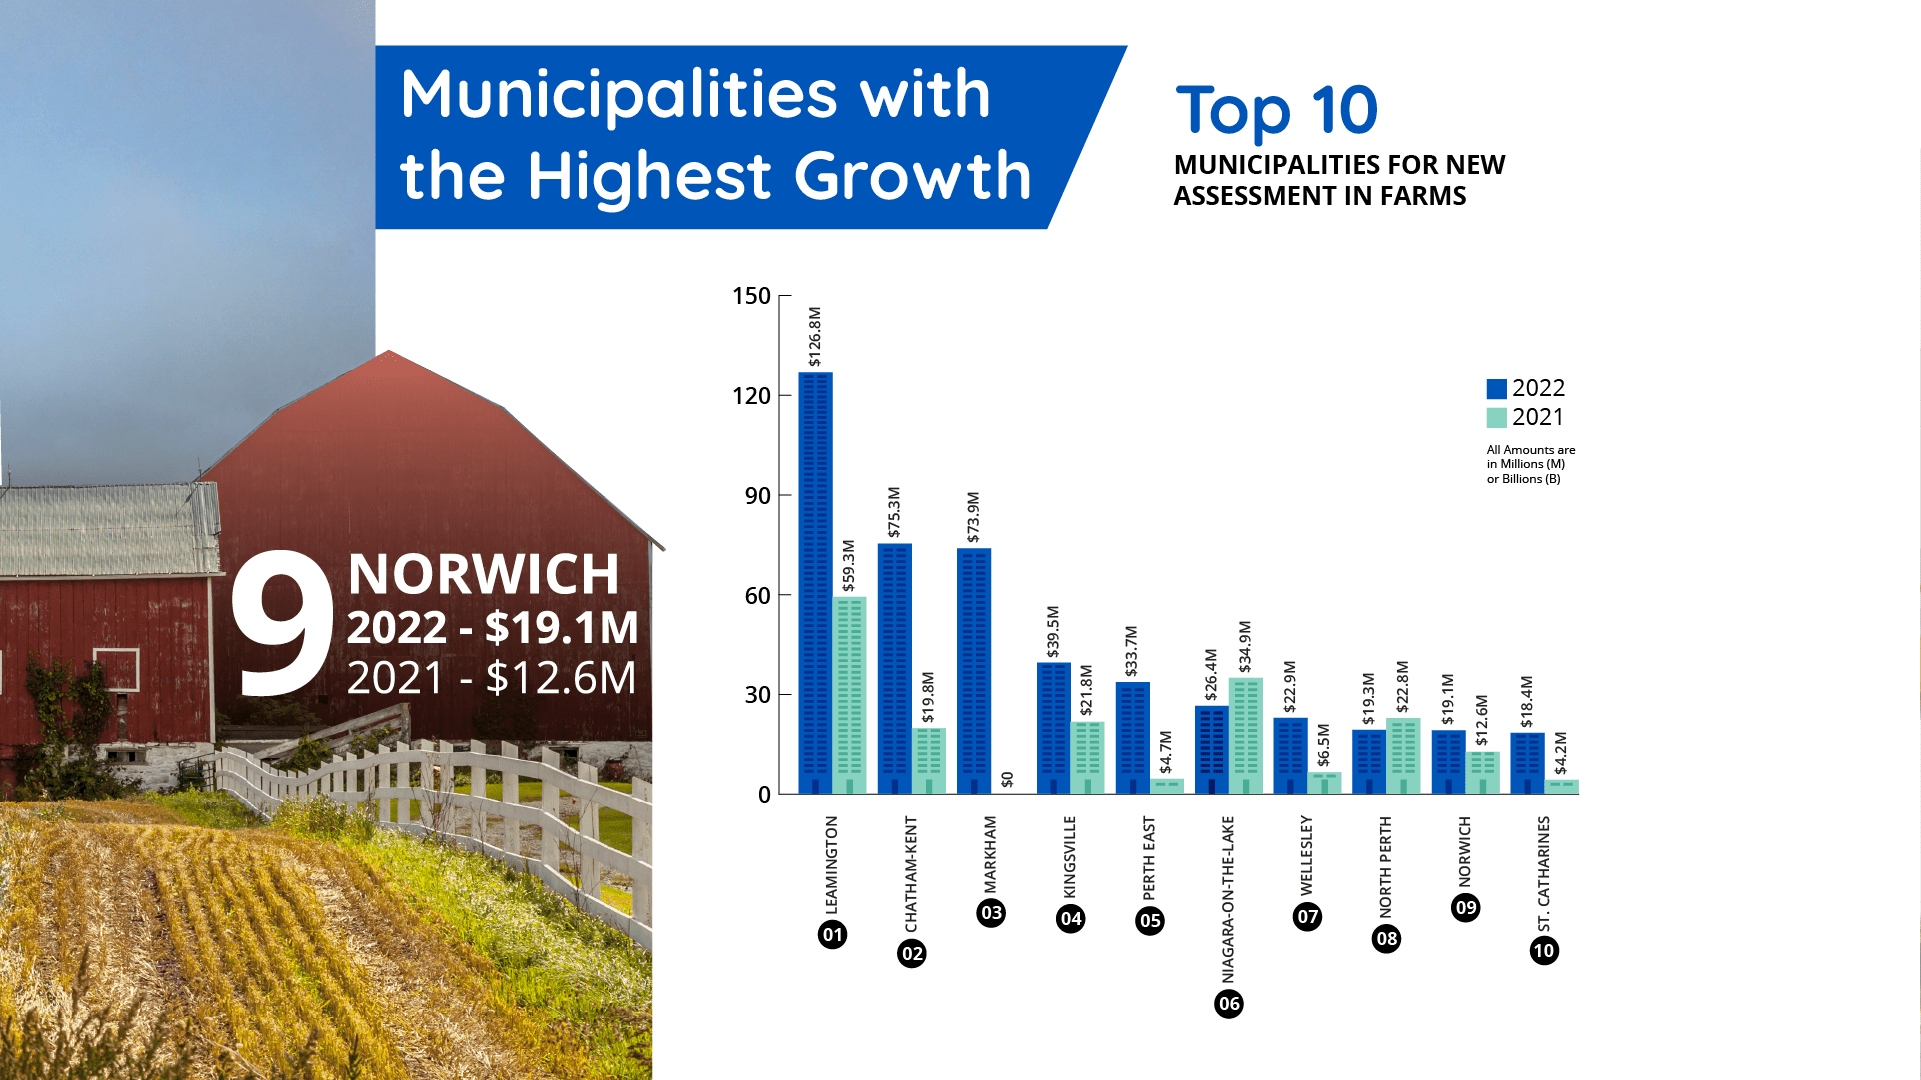 Visual of the top 10 municipalities for new assessment in farms.